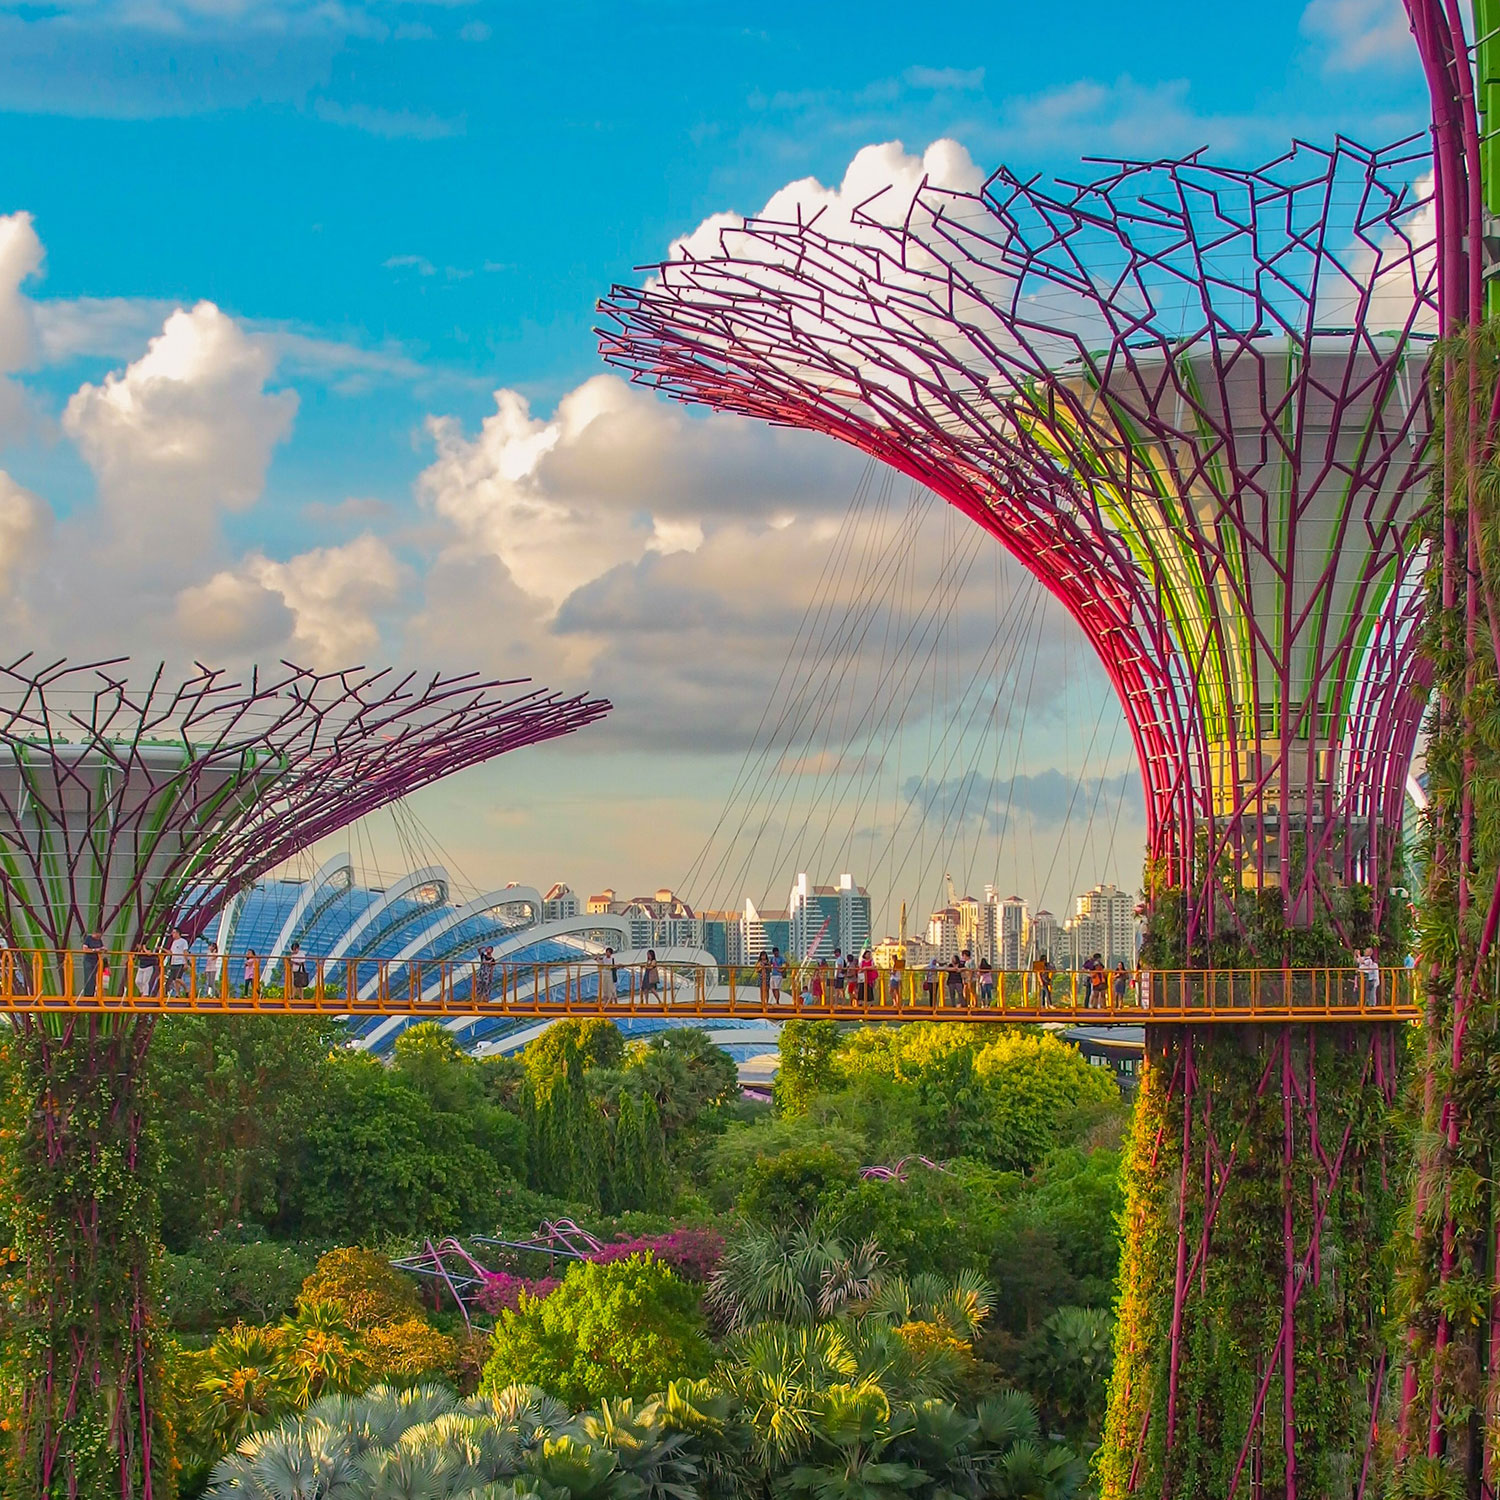 Super Tree Grove at Gardens by the Bay - photo: Coleen Rivas